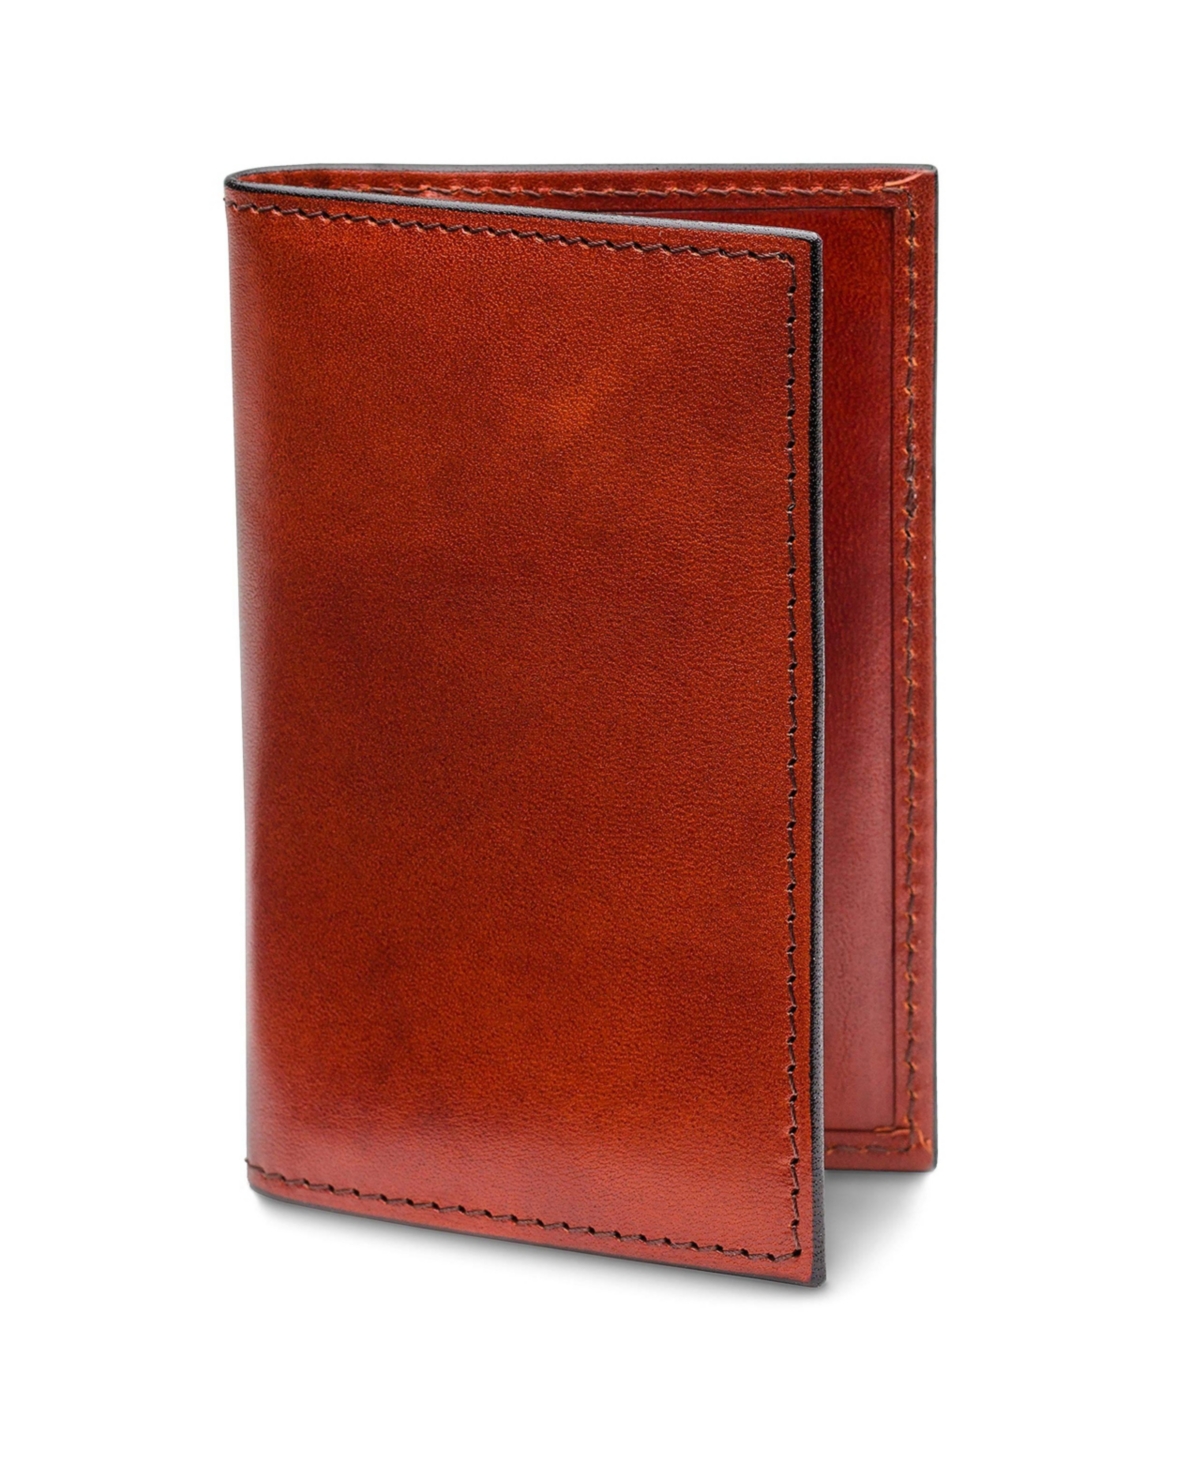 Old Leather Calling Card Case - Cognac